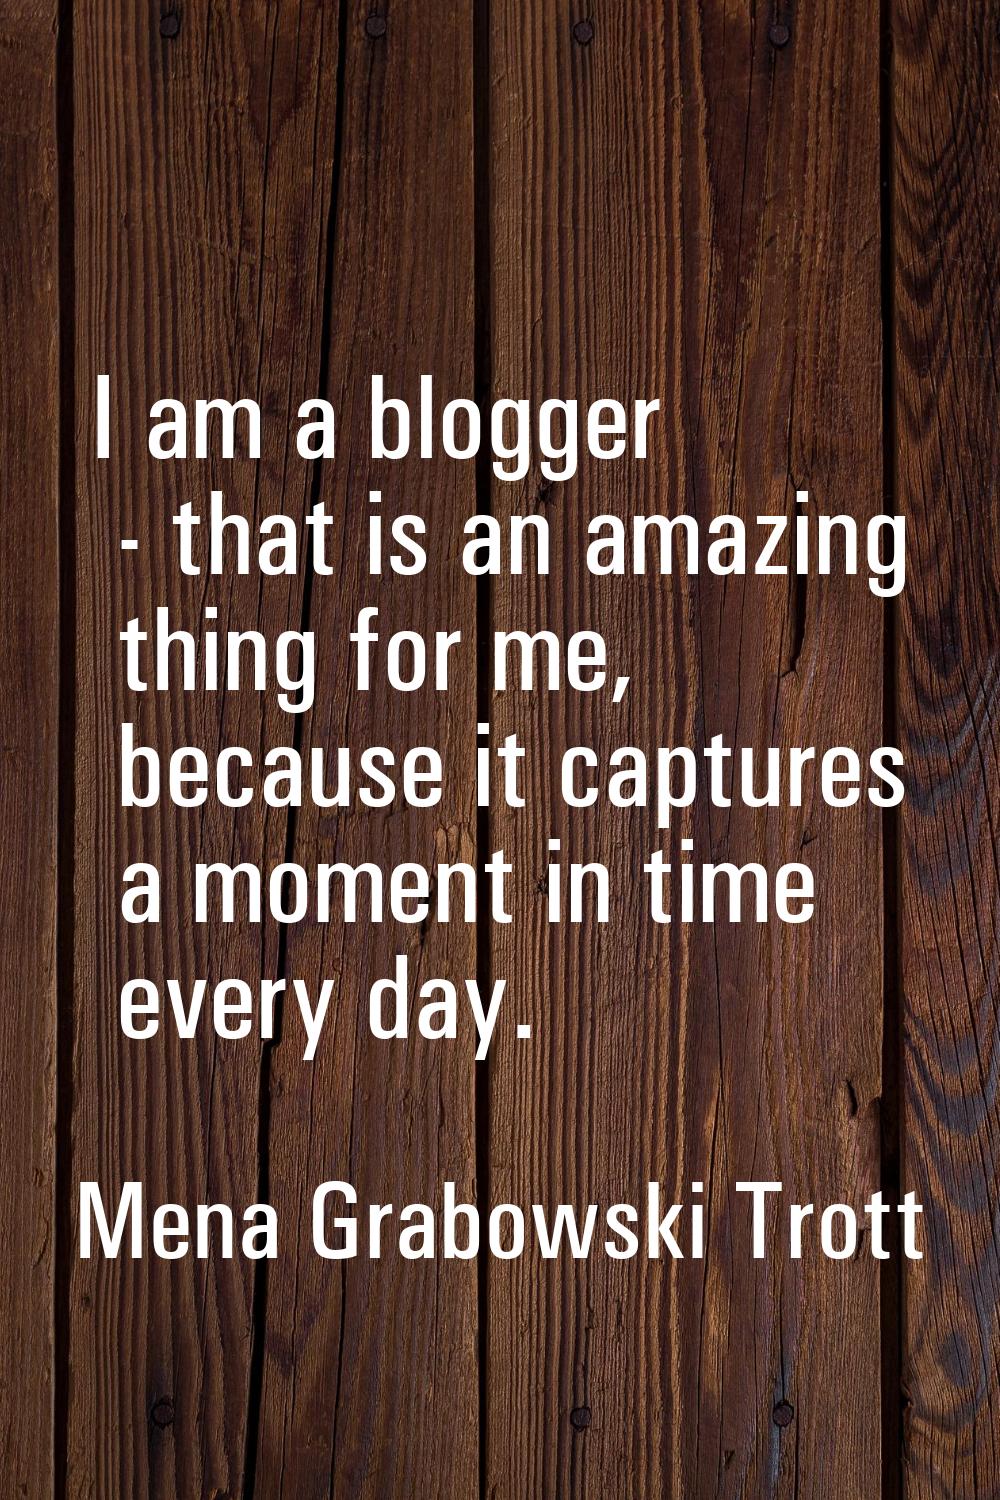 I am a blogger - that is an amazing thing for me, because it captures a moment in time every day.